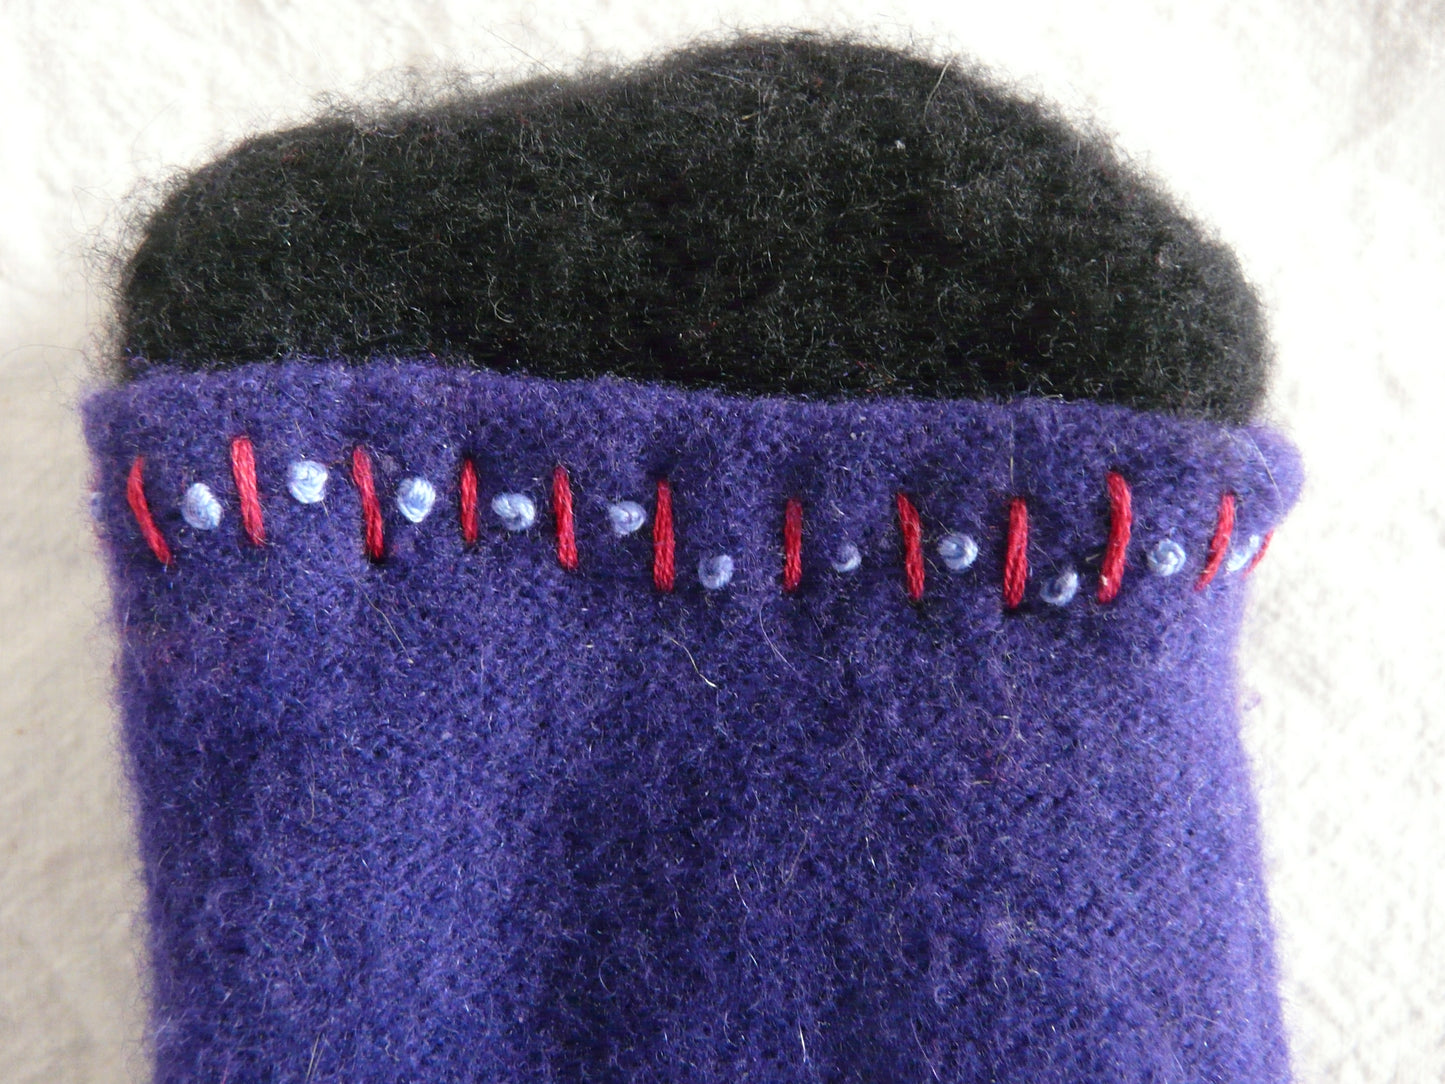 Single Cashmere Mittens - Red, White, and Blue!